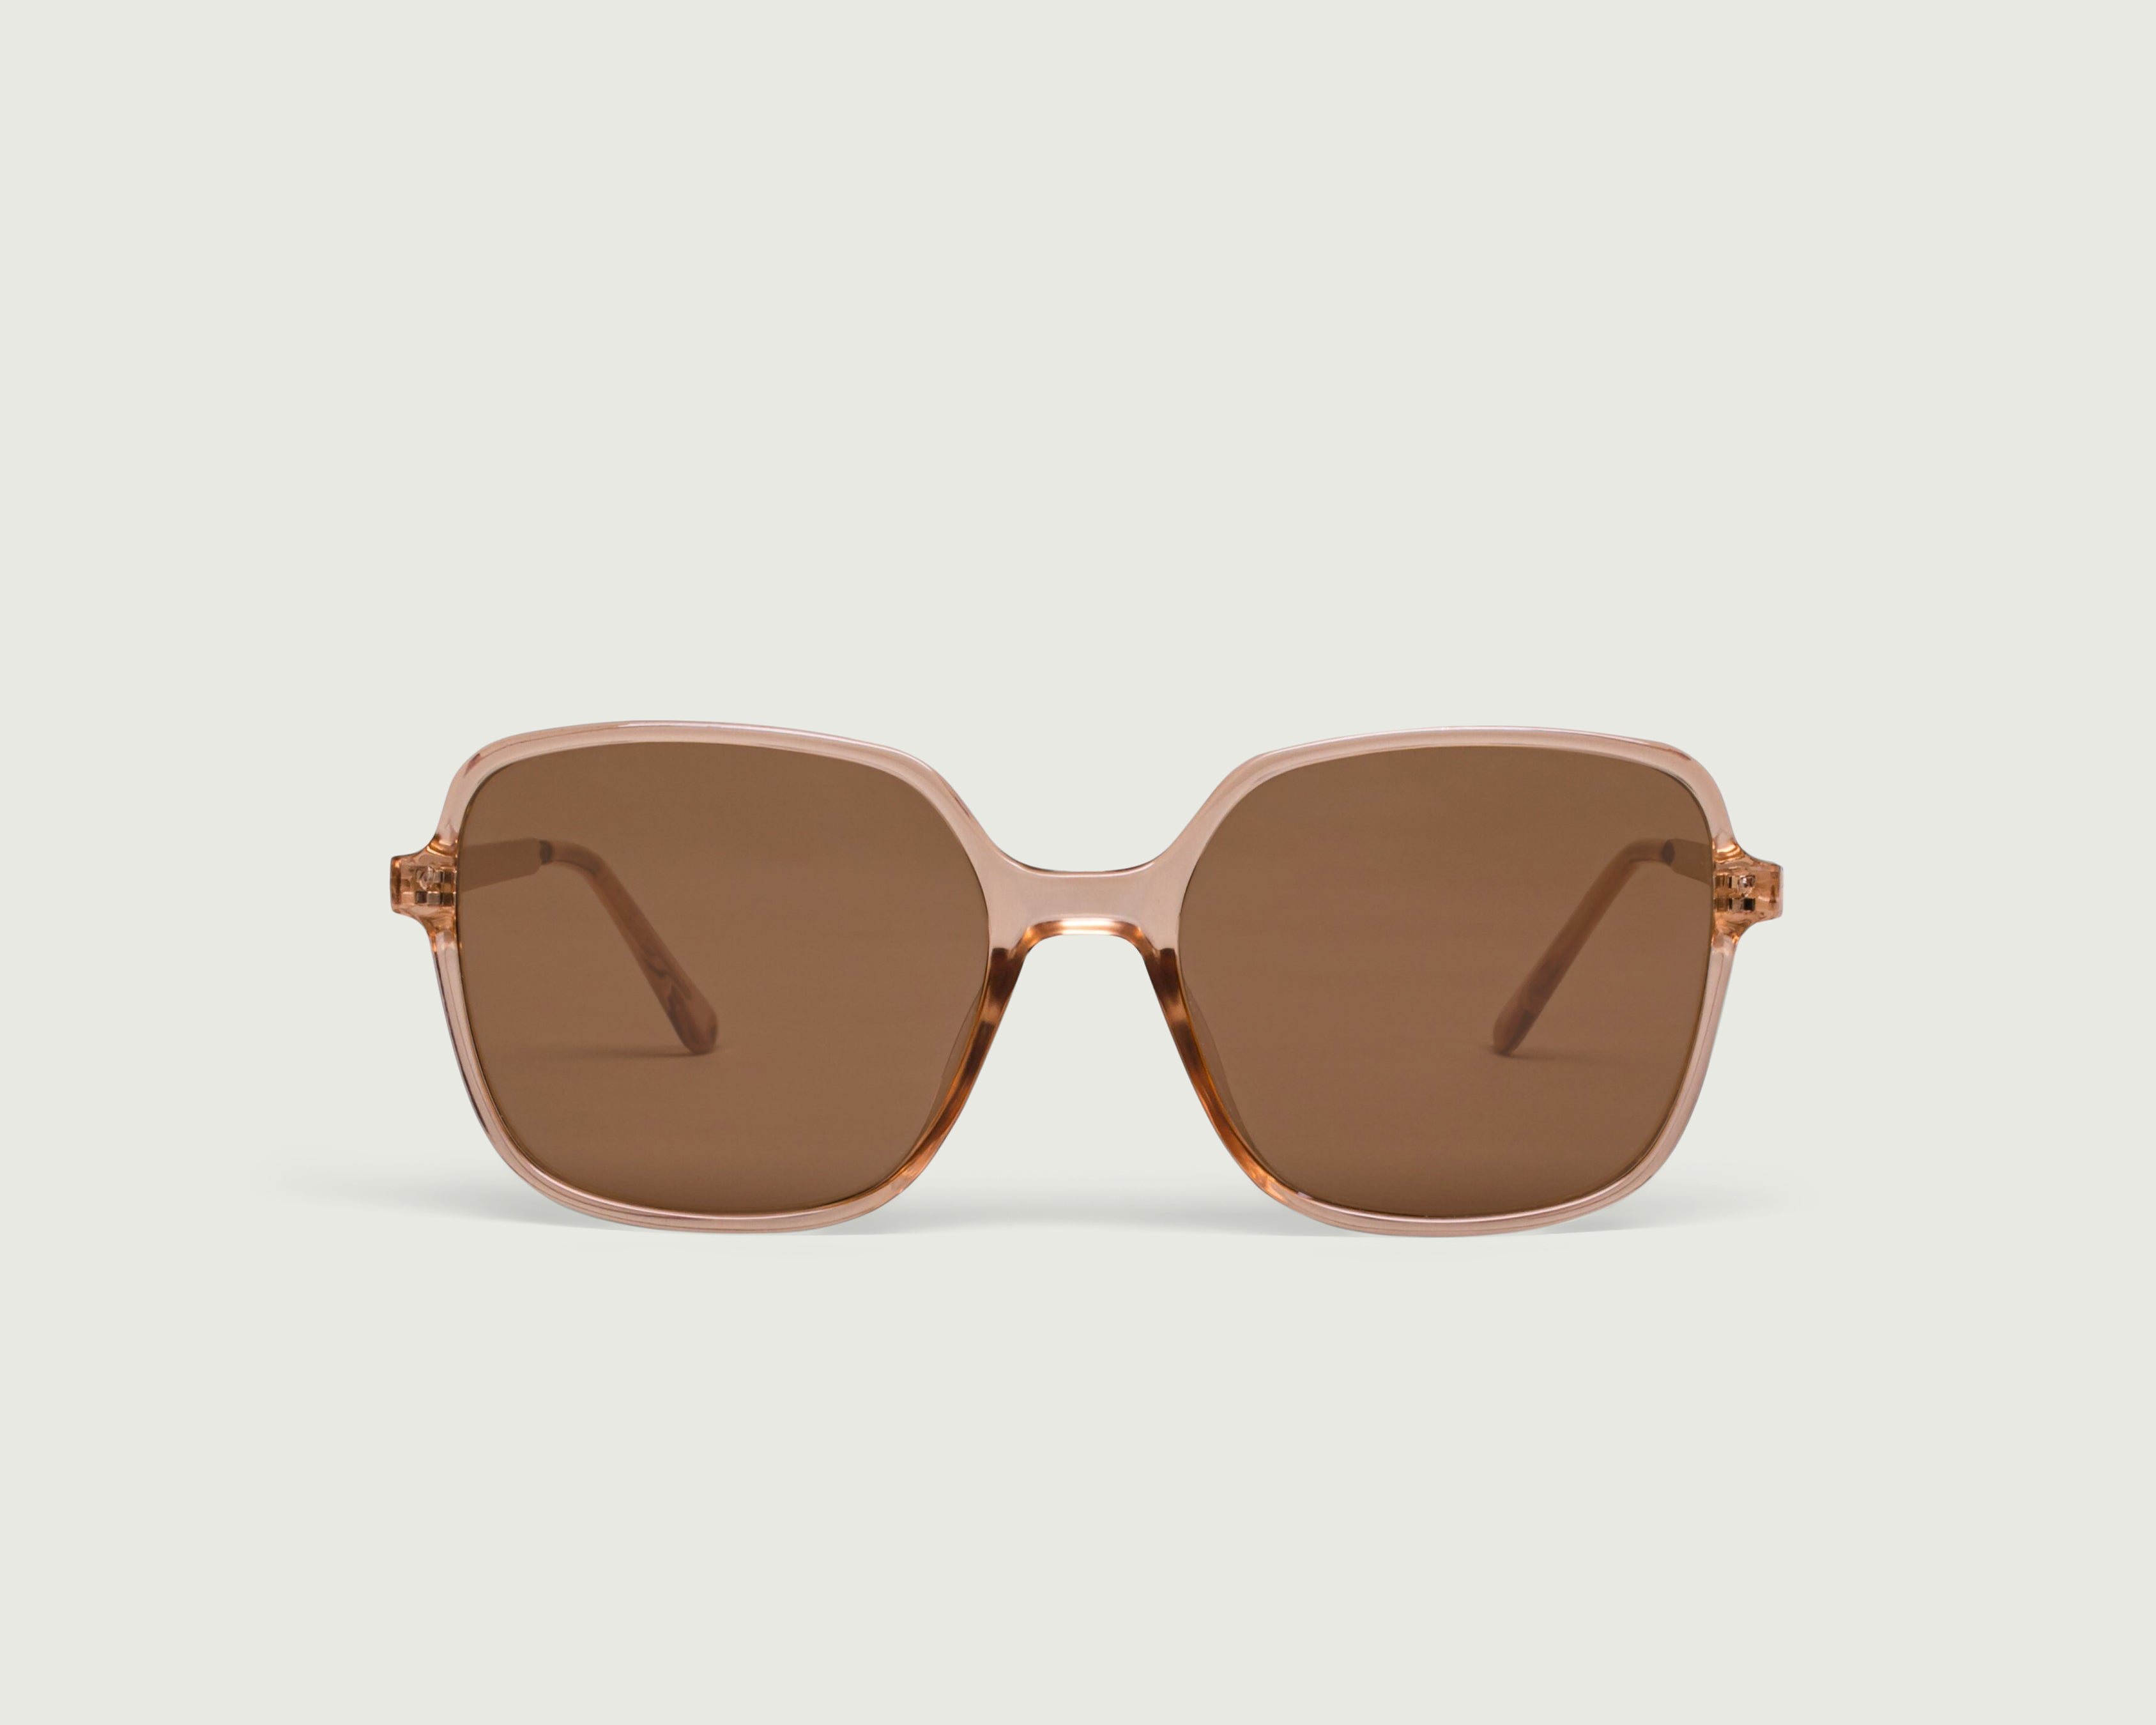 Rodeo::Velma Sunglasses oversized taupe metal front (4687761375286)